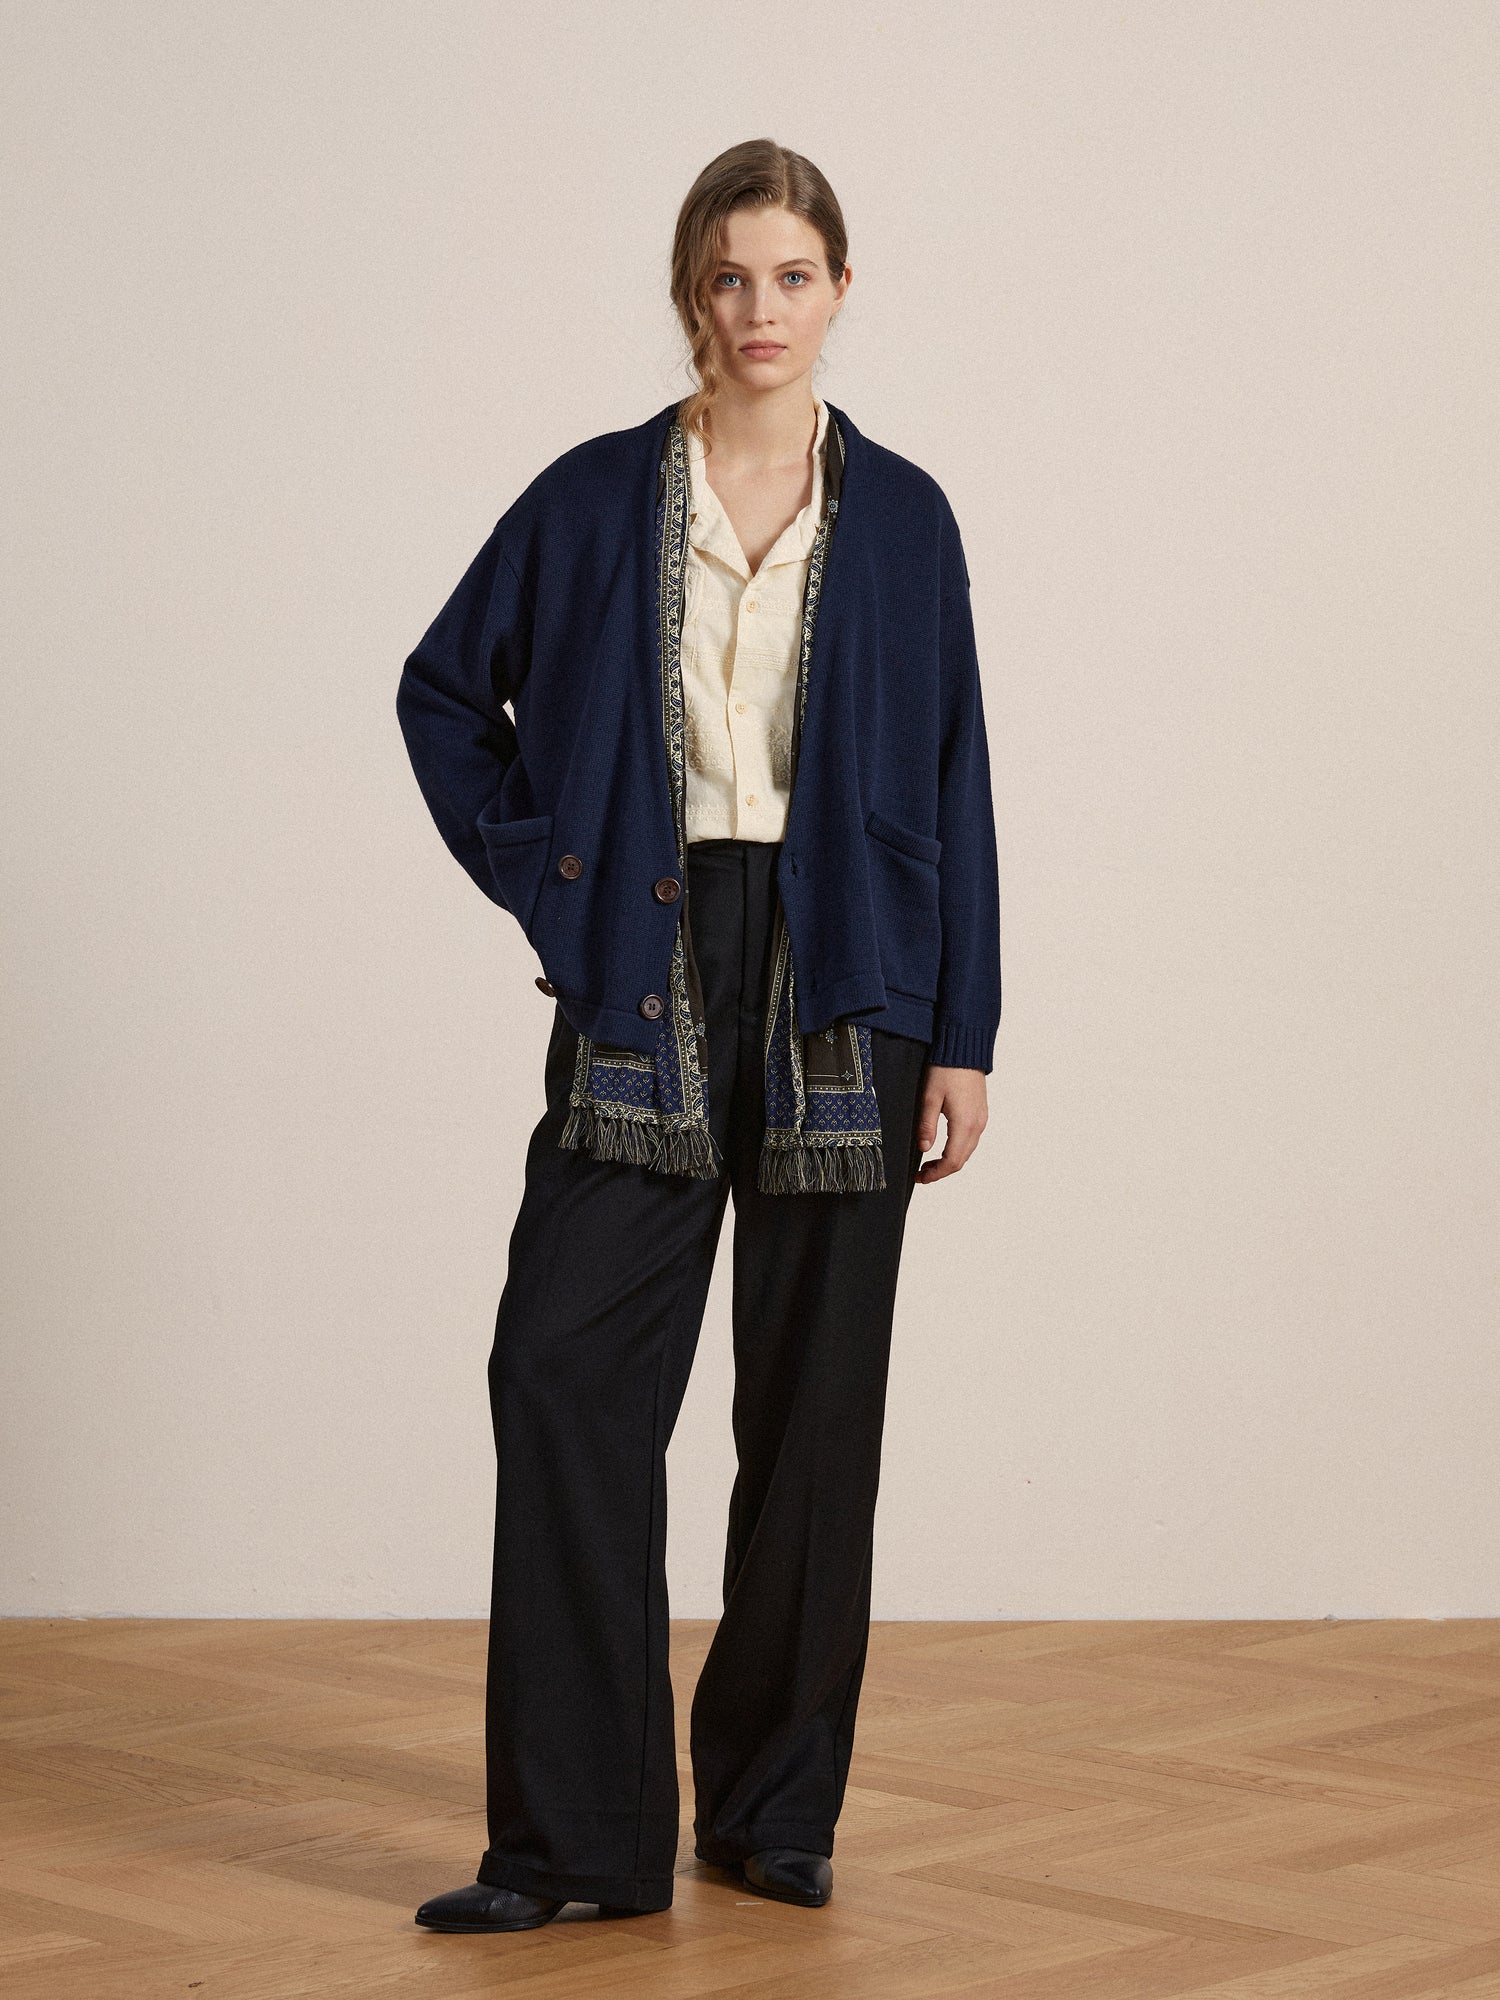 The model is wearing a navy, Larsi Double Breasted Knit Cardigan and black trousers.